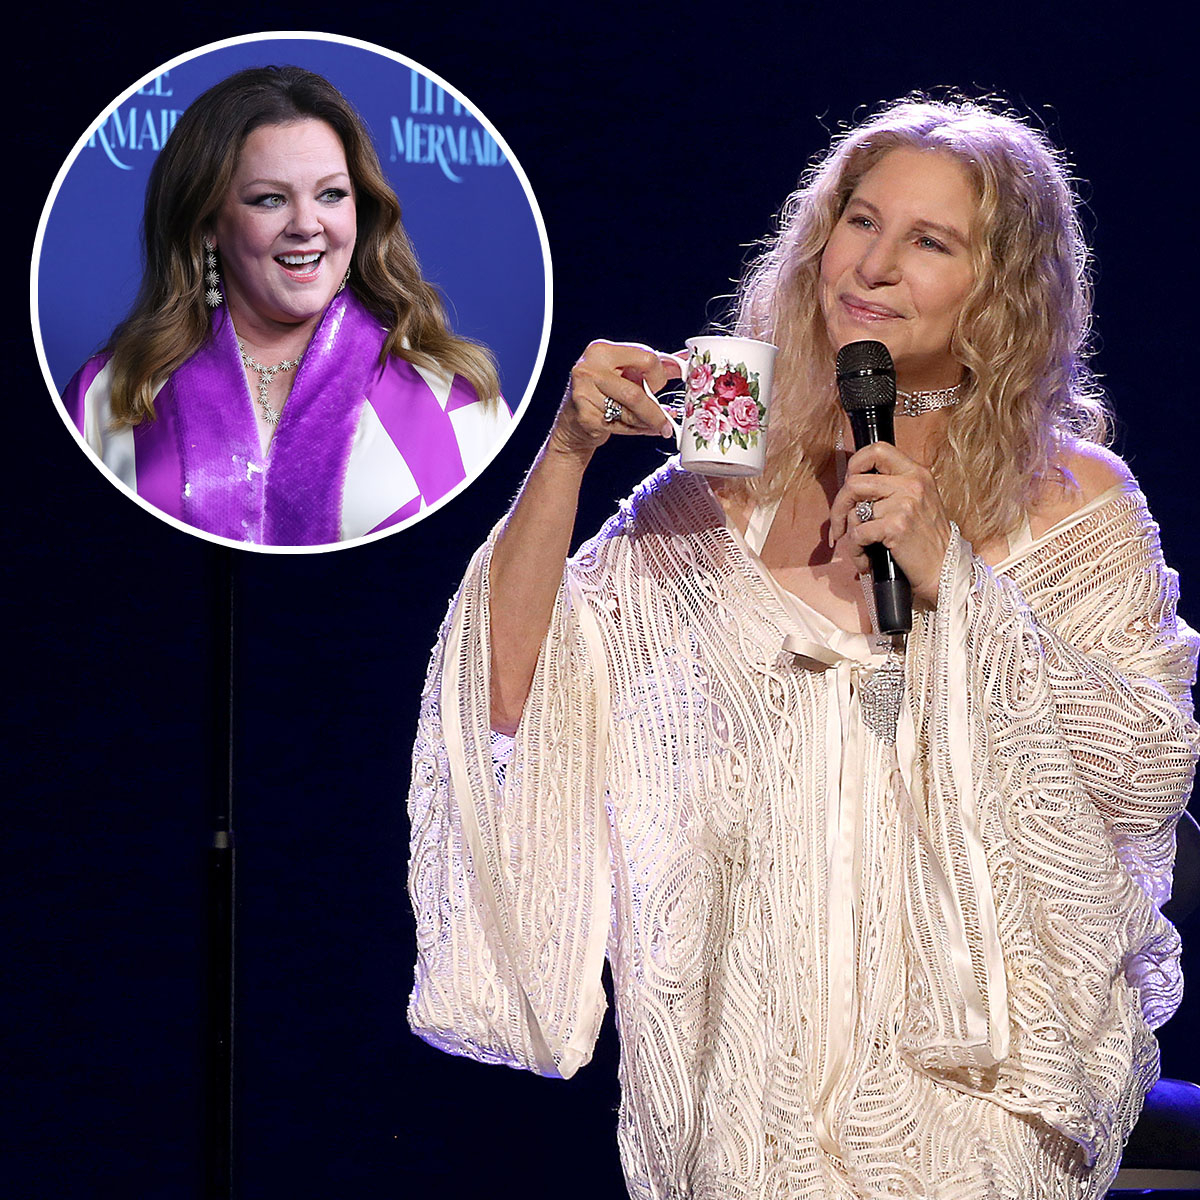 Barbra Streisand explains comment asking Melissa McCarthy about weight loss drug